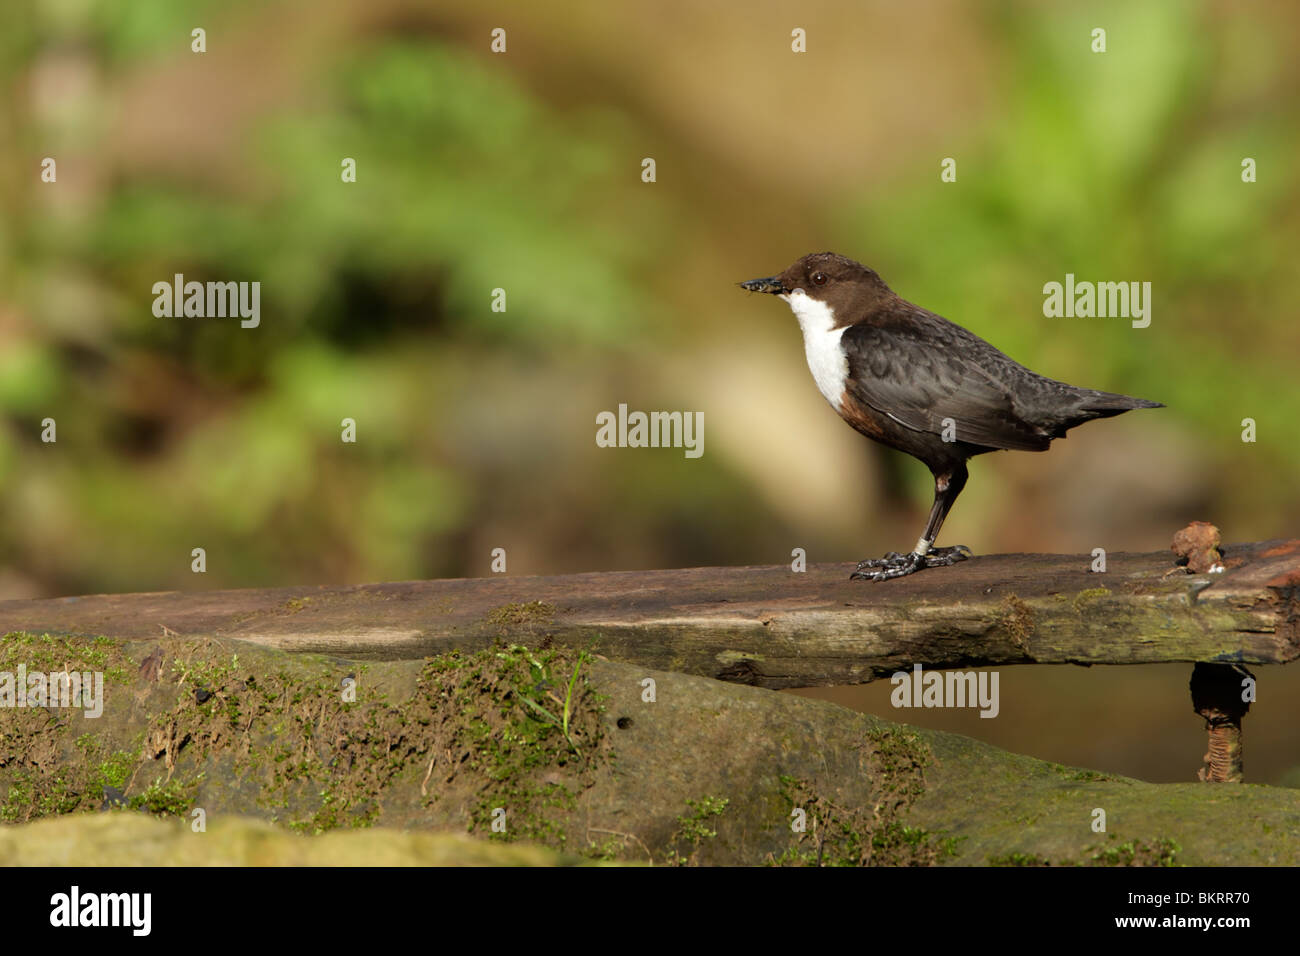 Dipper, white-throated (Cinclus cinclus) standing on wooden board Stock Photo